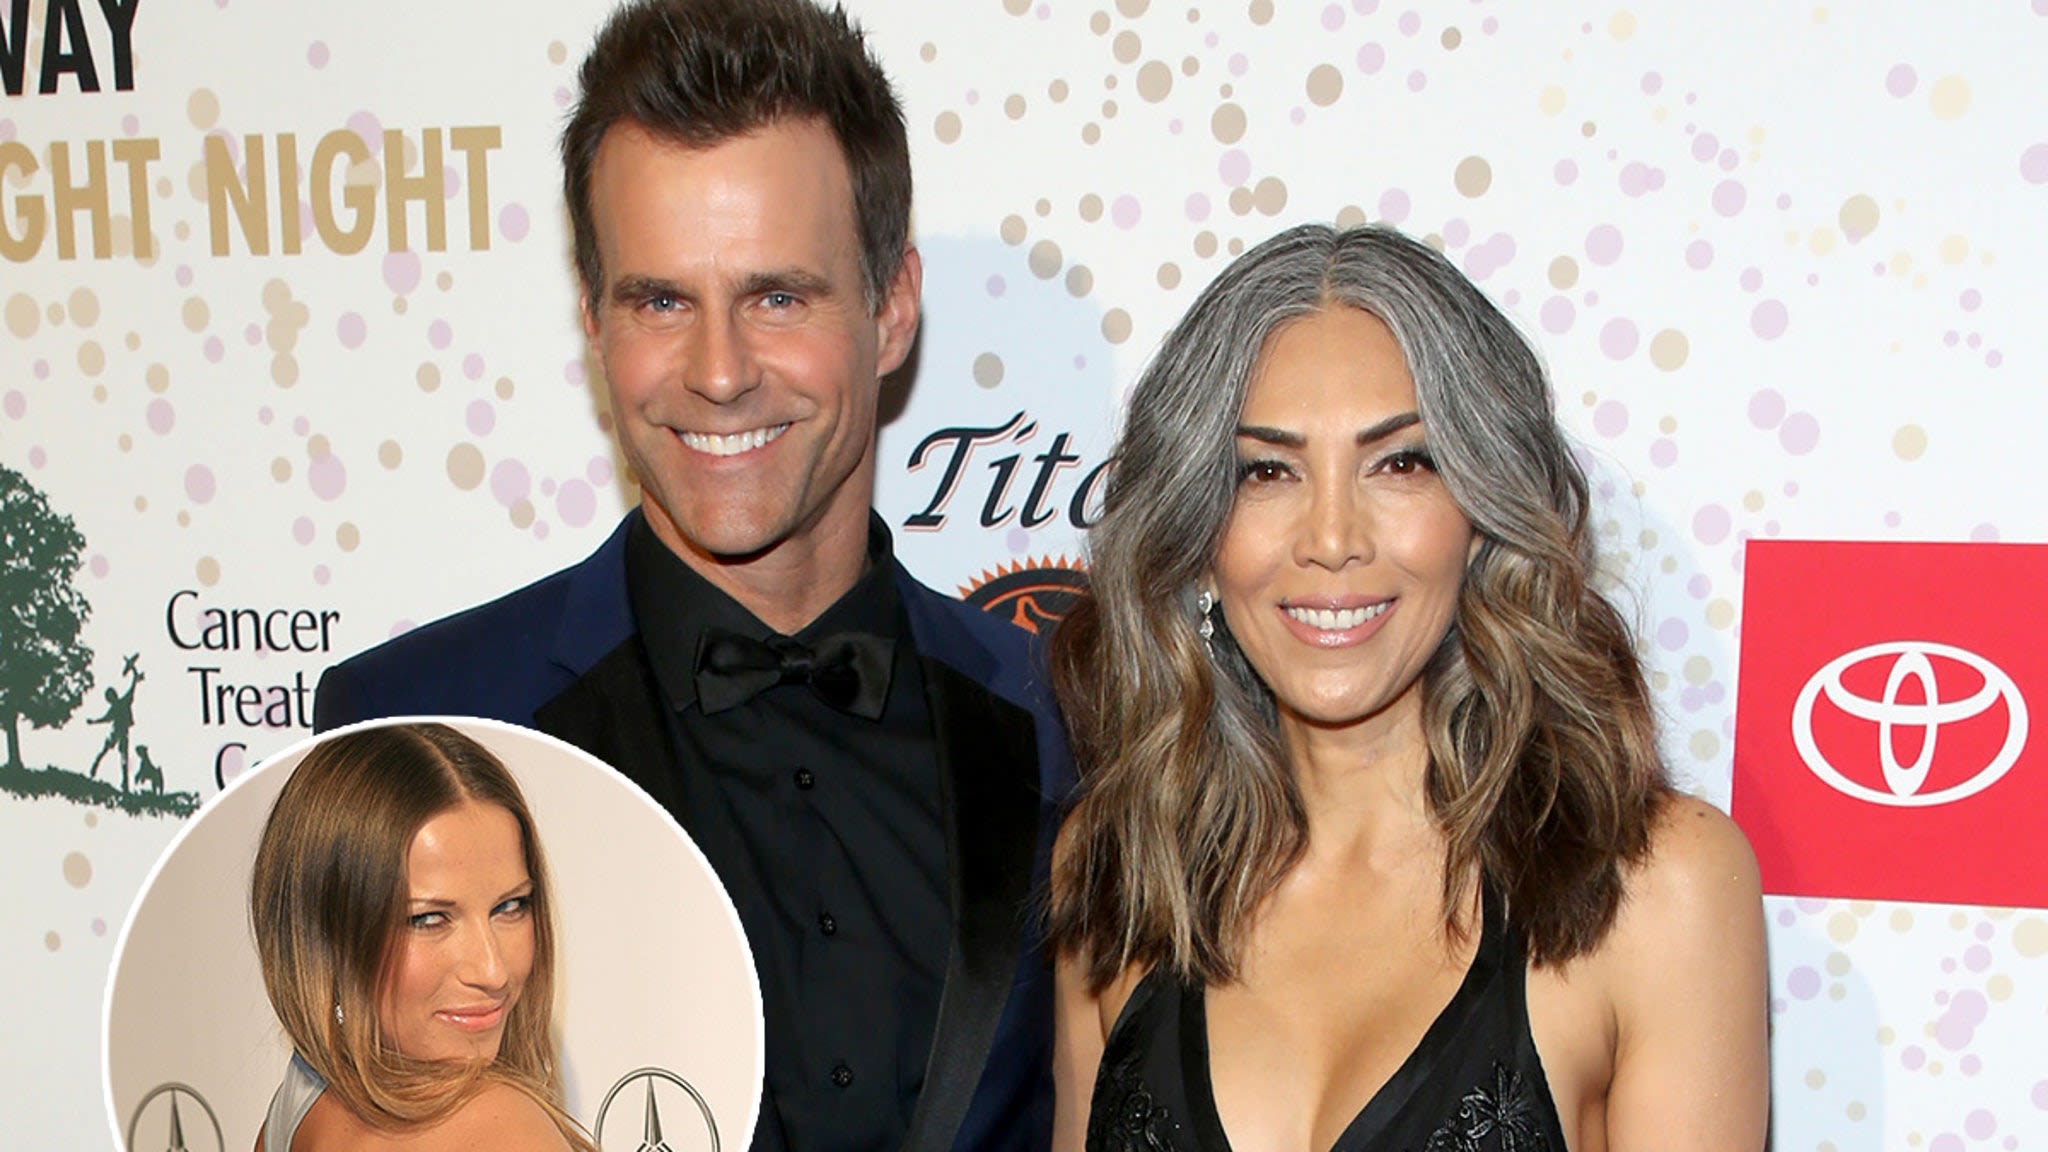 Cameron Mathison Asked for Different DWTS Partner Amid Marital Issues Years Ahead of Divorce